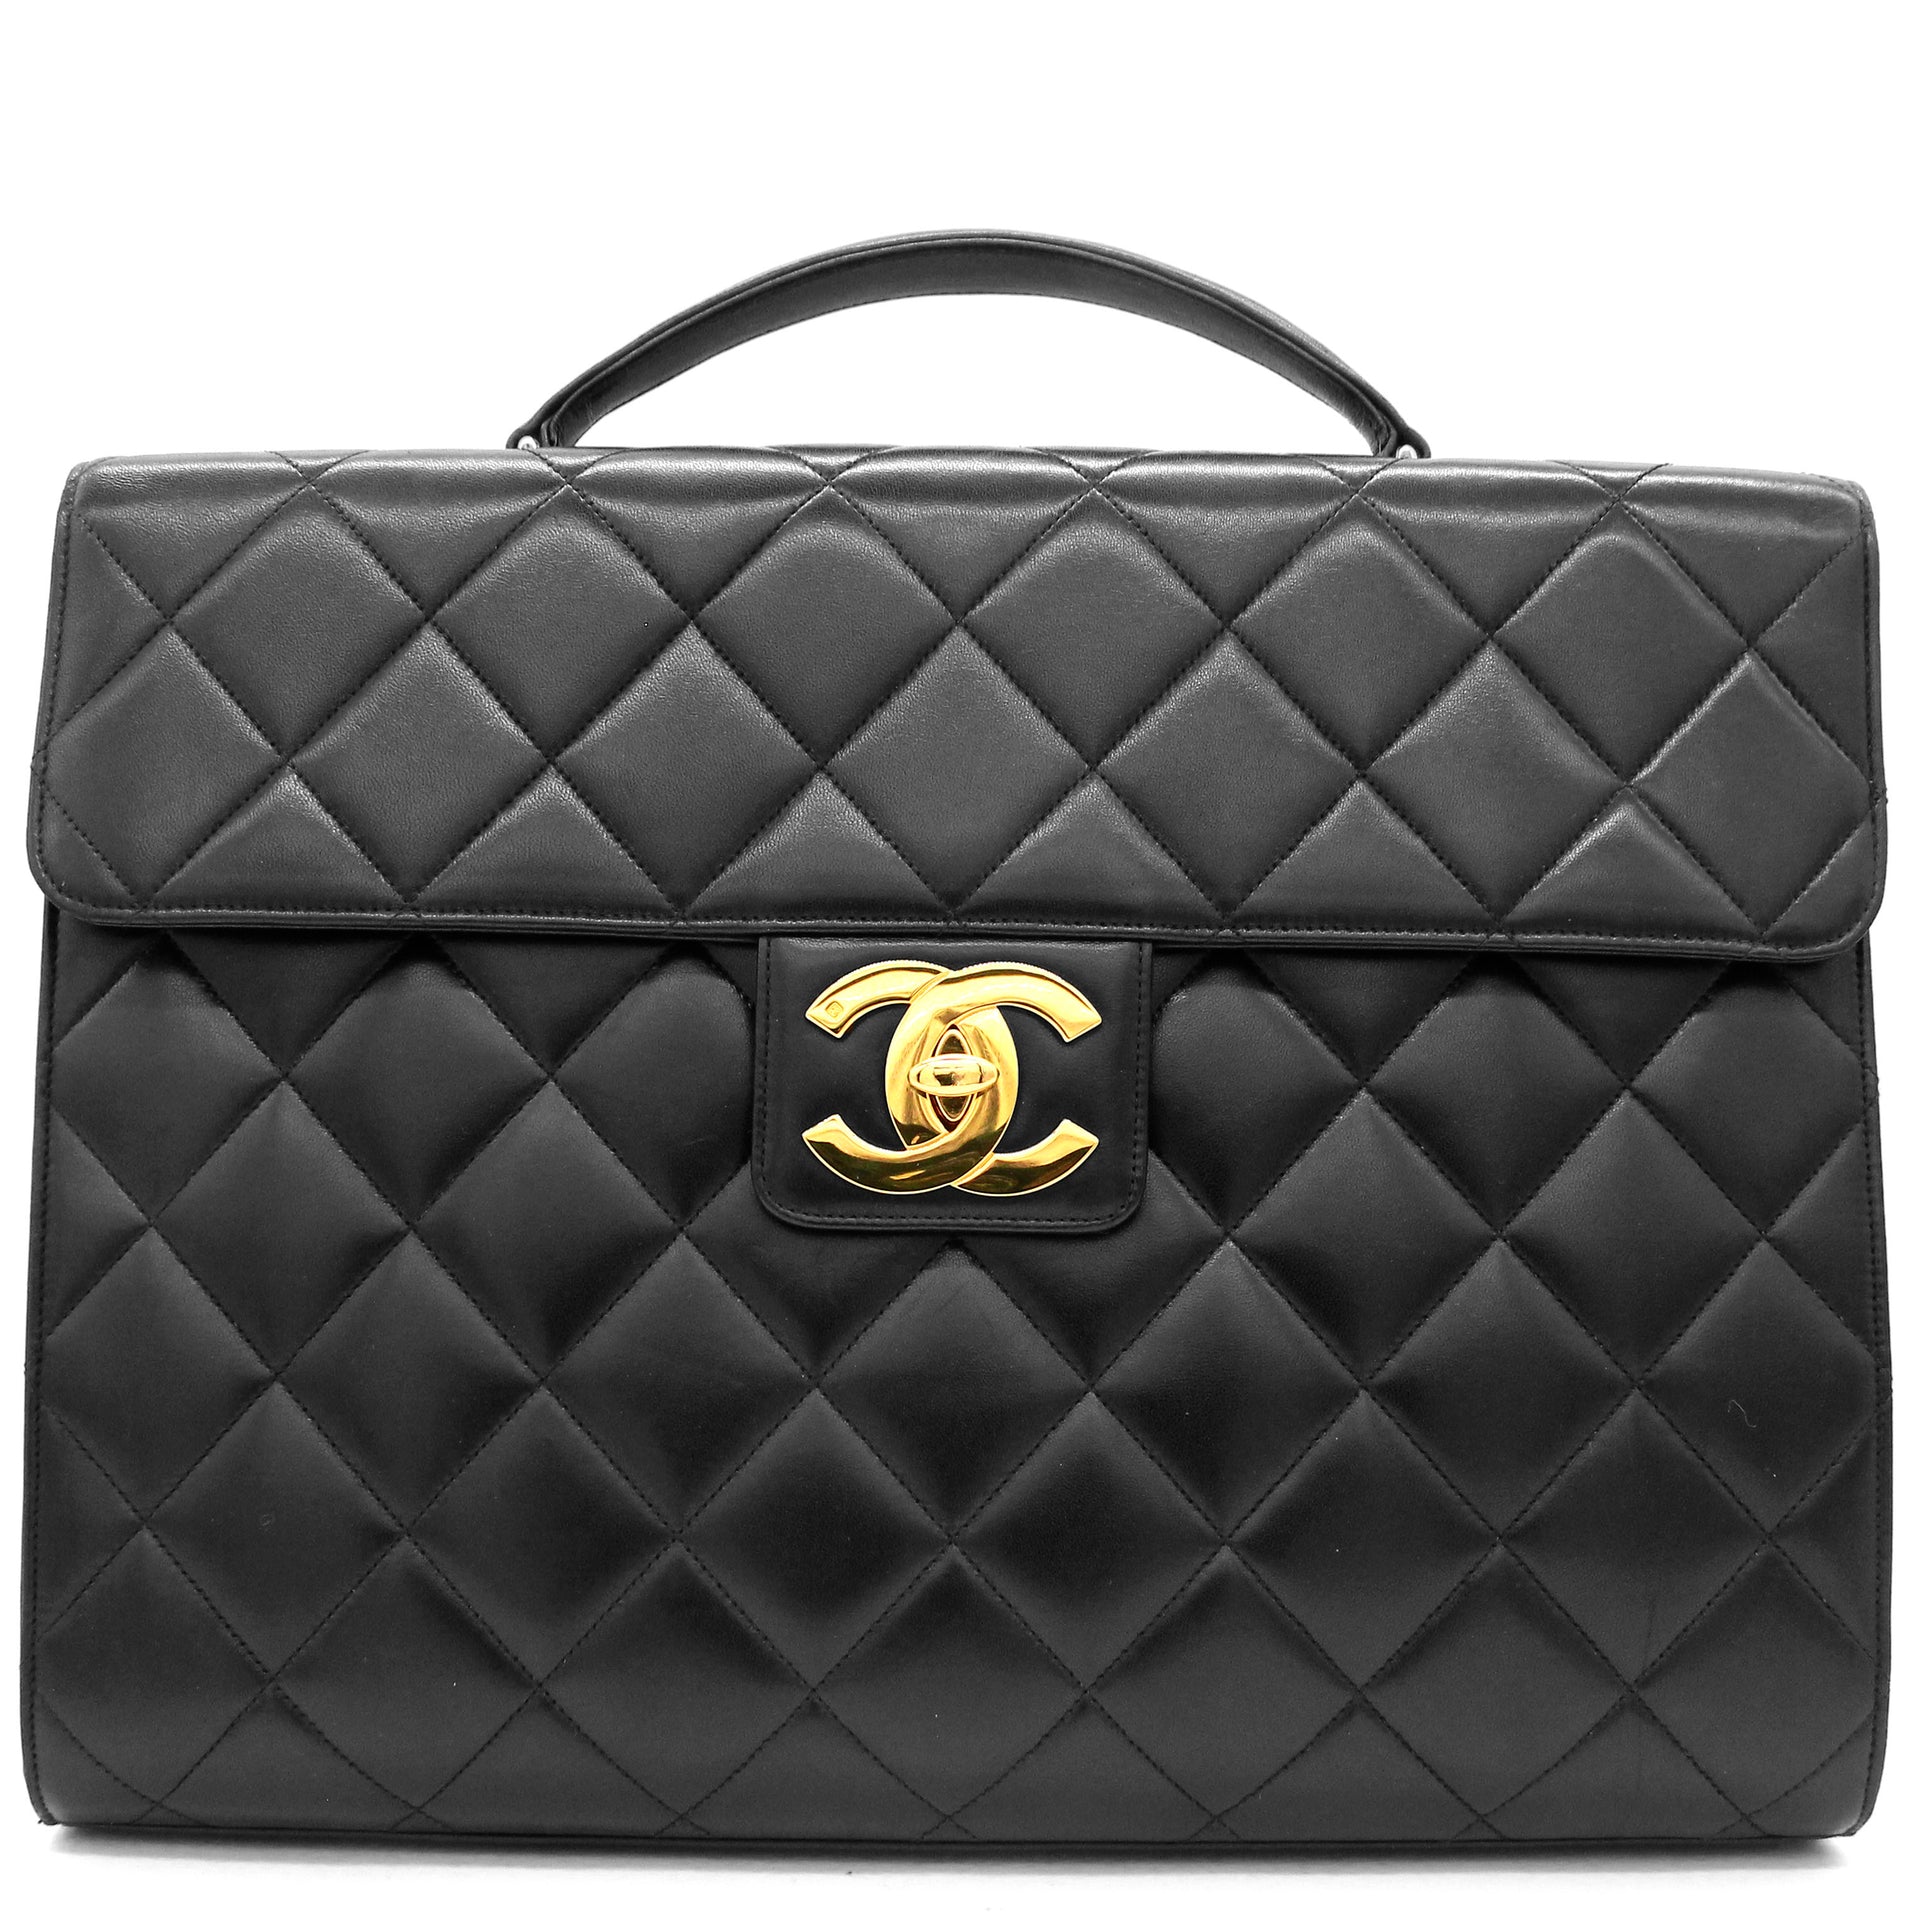 1995 diamond quilted briefcase